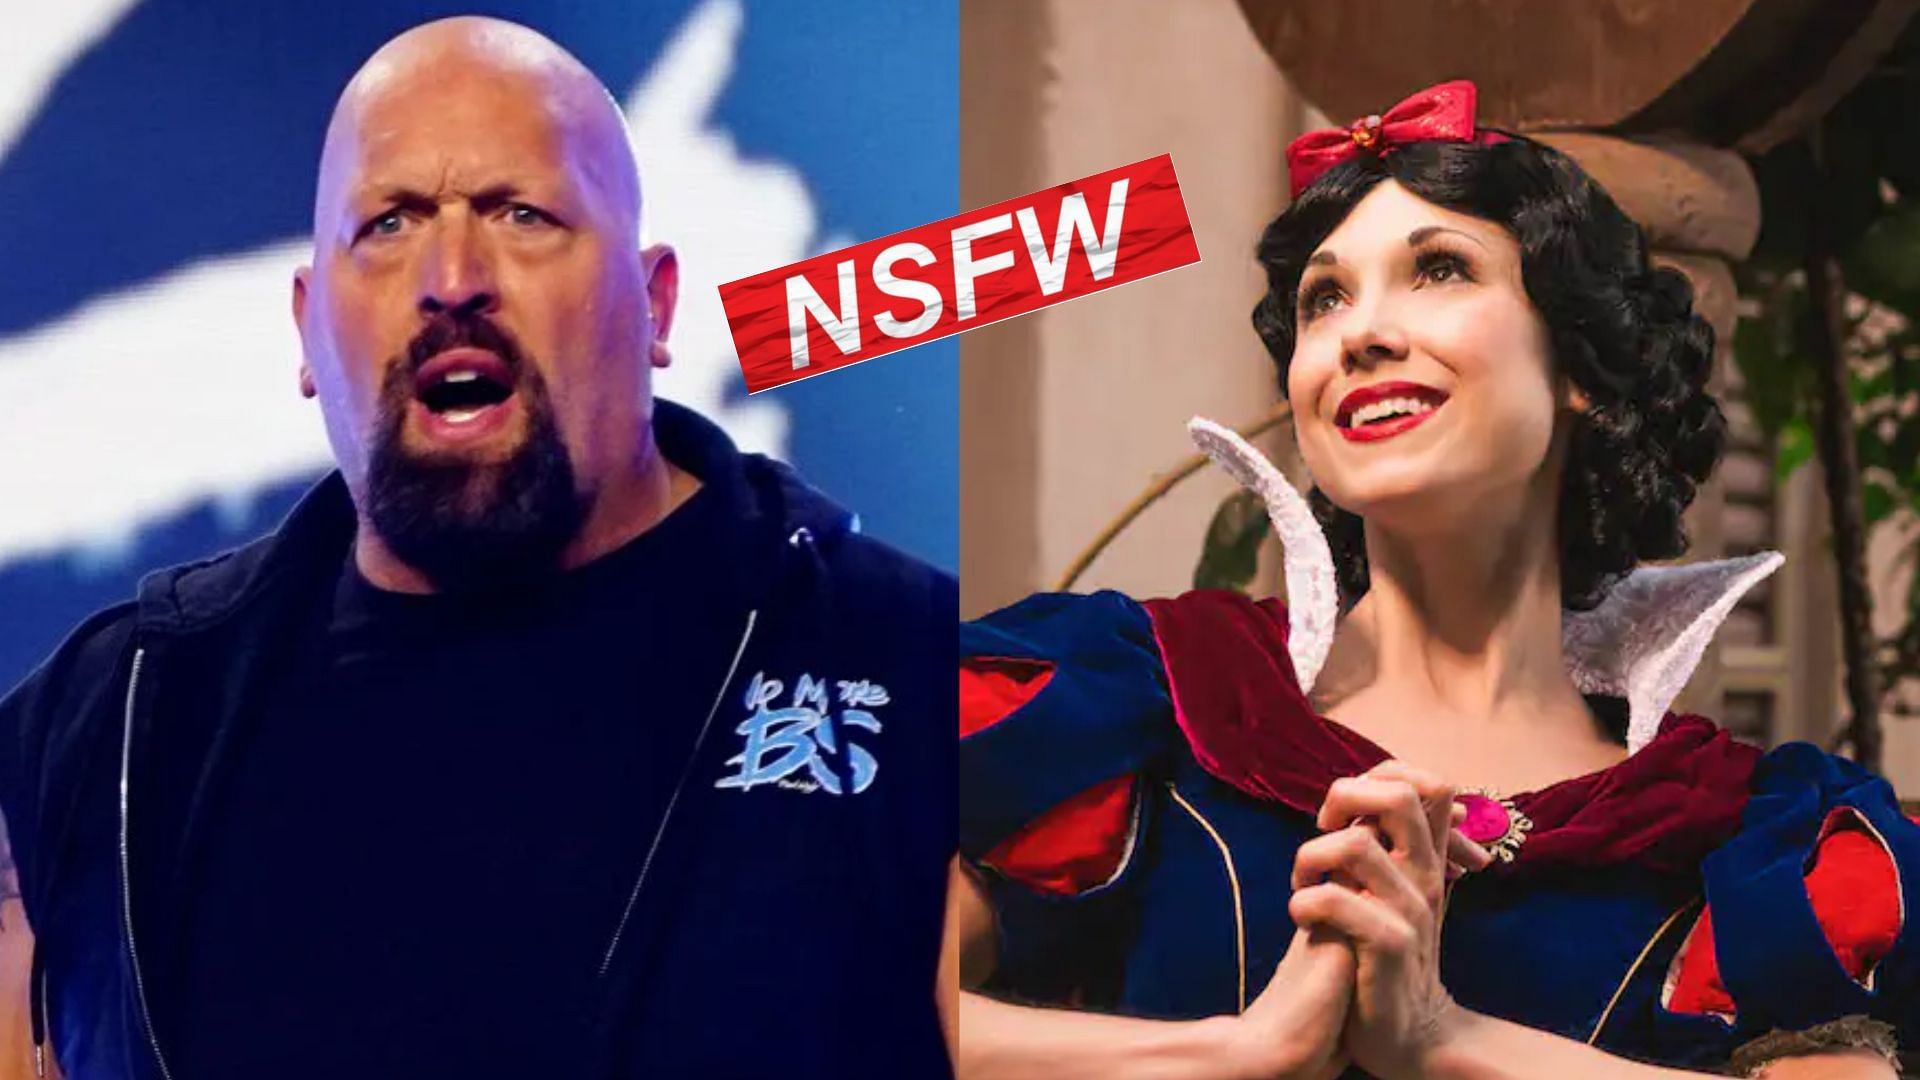 The WWE legend almost made Snow White into Snow Wight